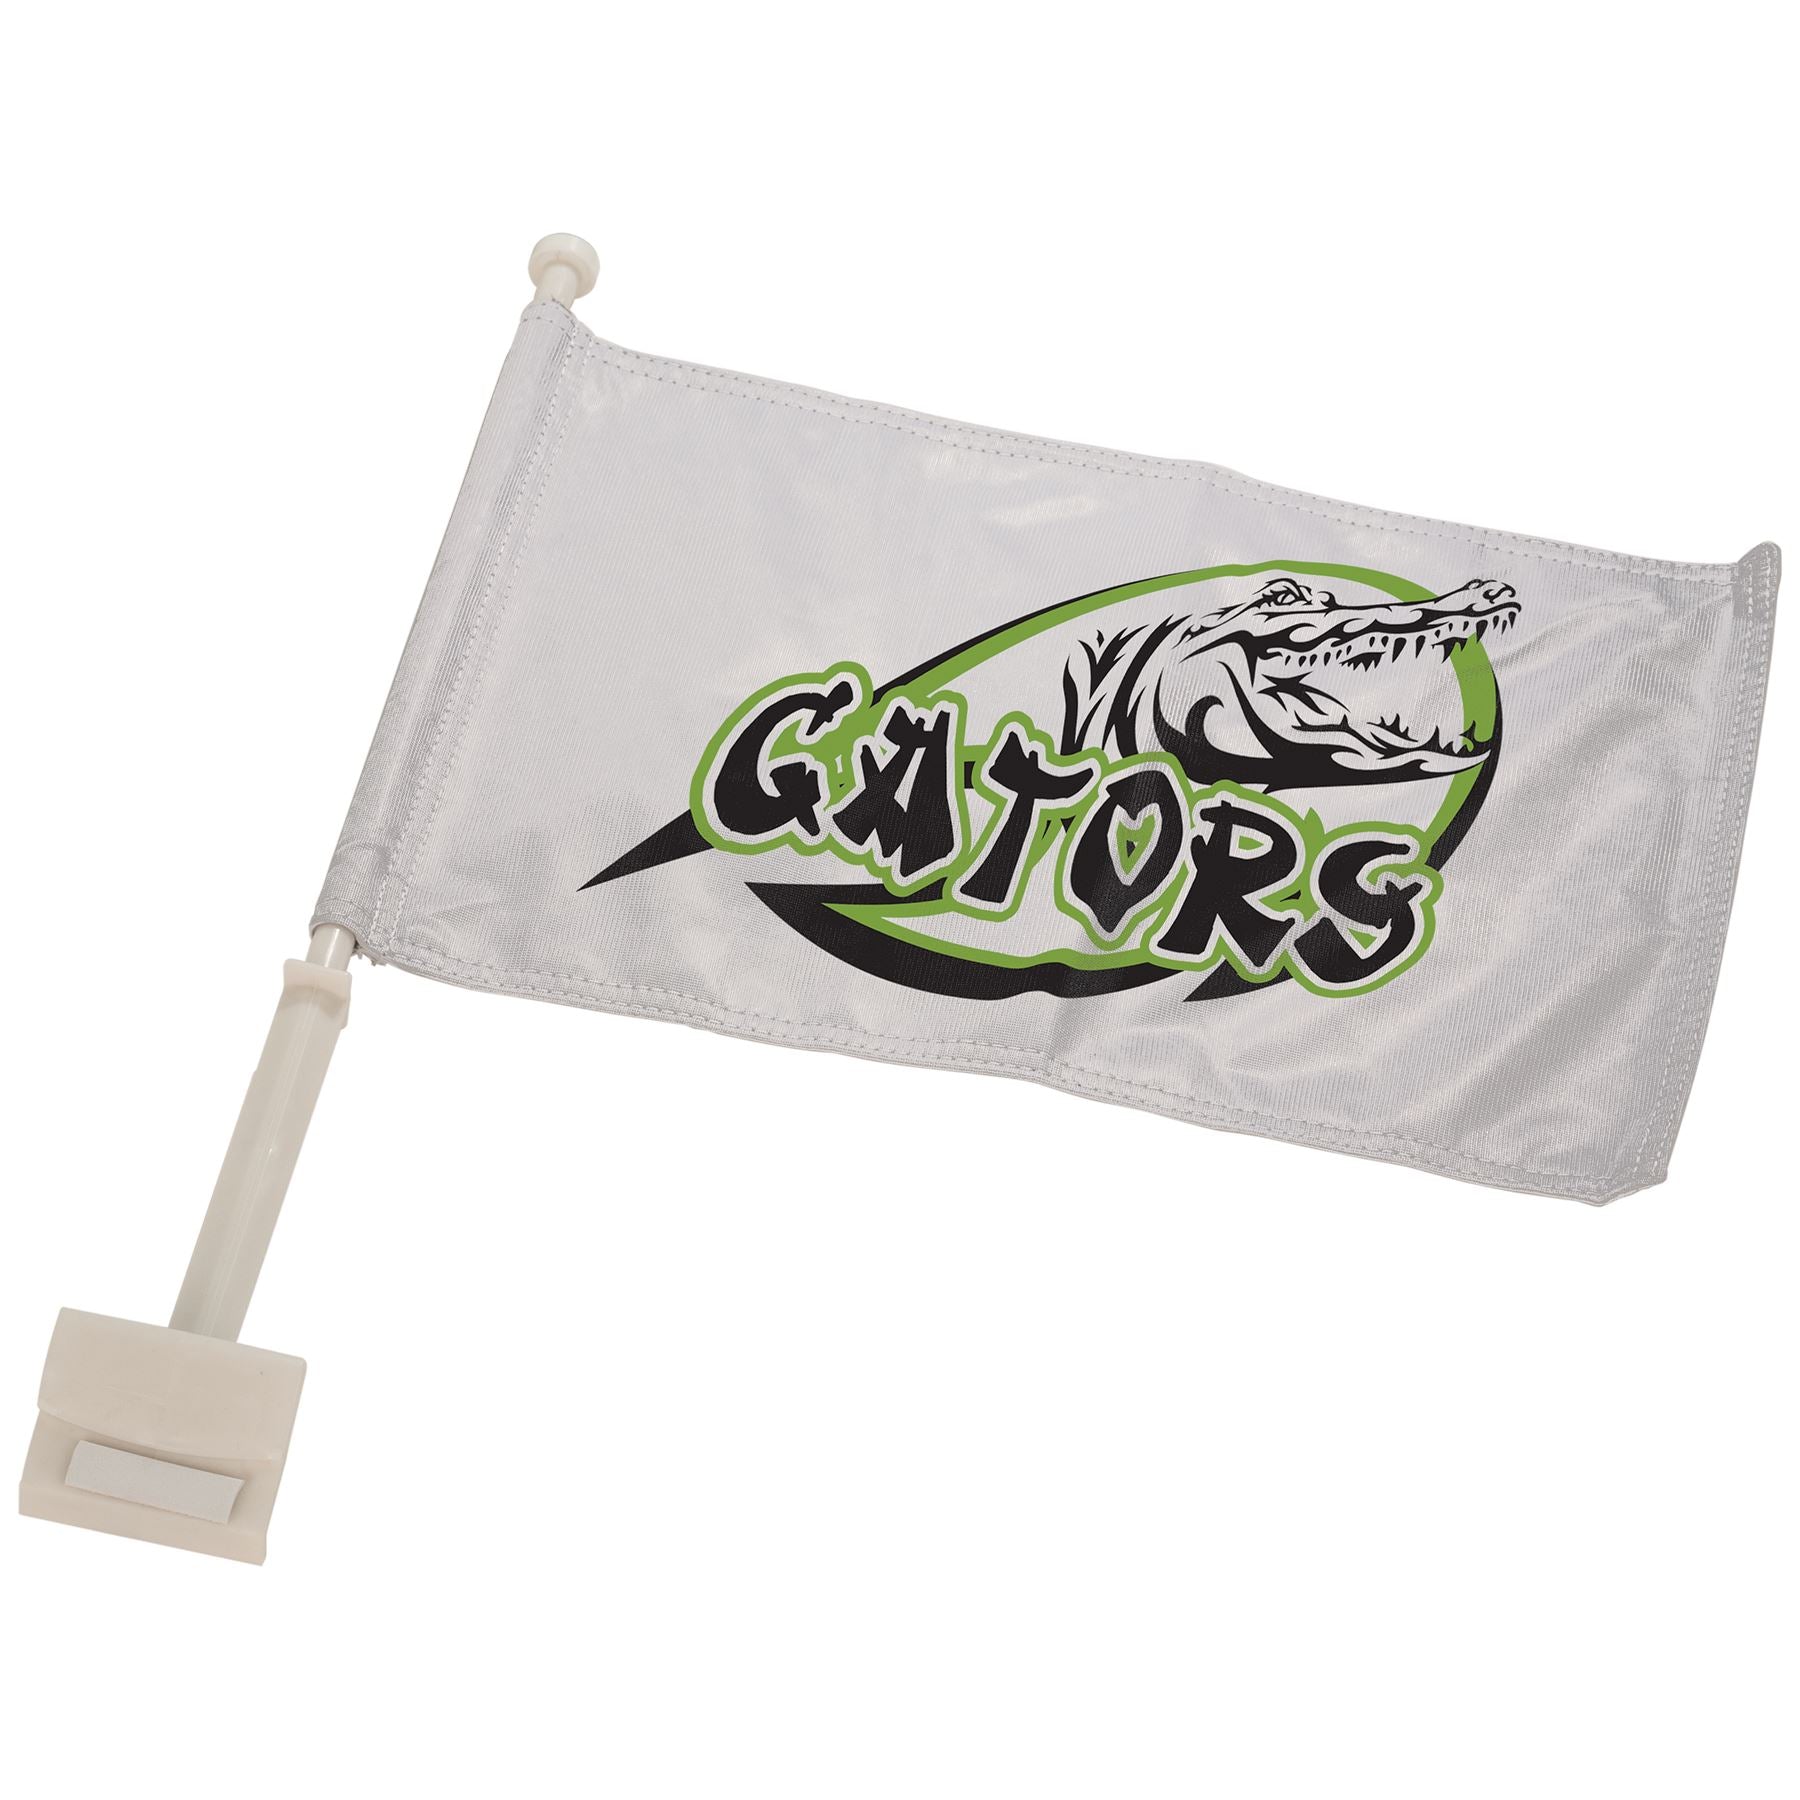 White Sublimatable Car Flag with Pole, 16" x 10 1/2", Full Color Dye Sub Car Flag Craftworks NW 